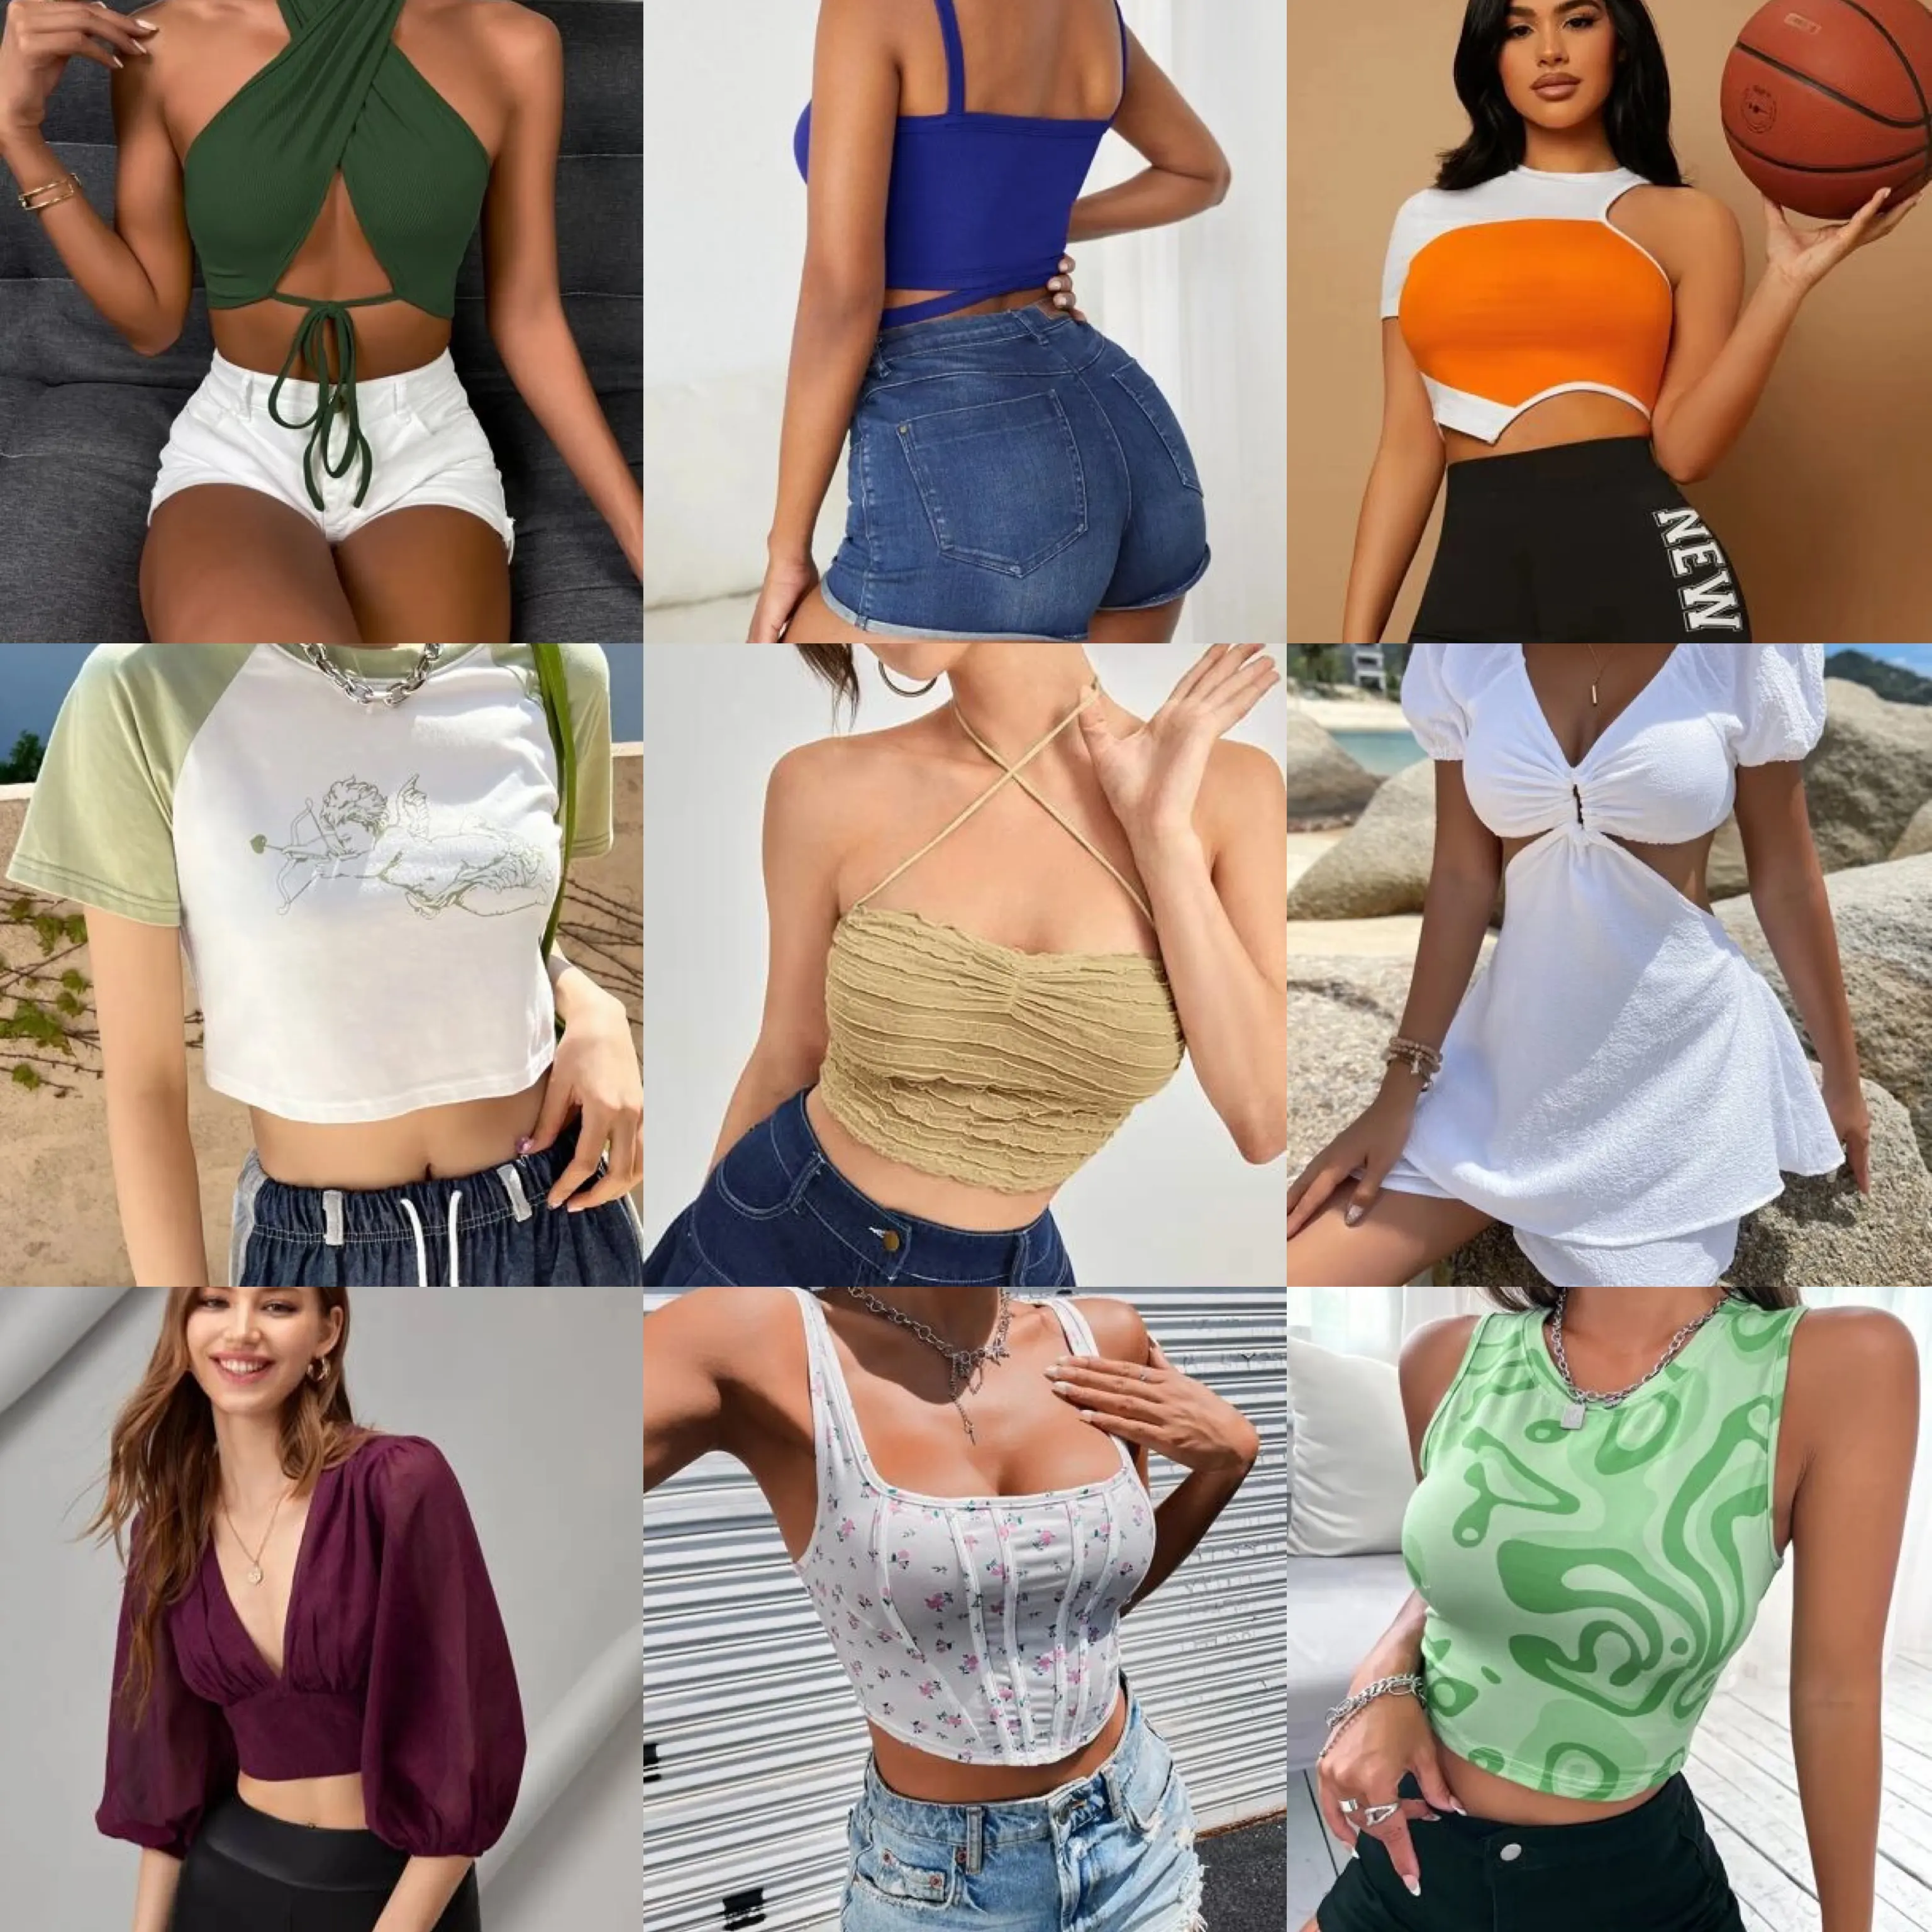 New stock clothes Women short top t-shirt low Price Bulk Clothing Casual Dress Clothes used clothes women dress